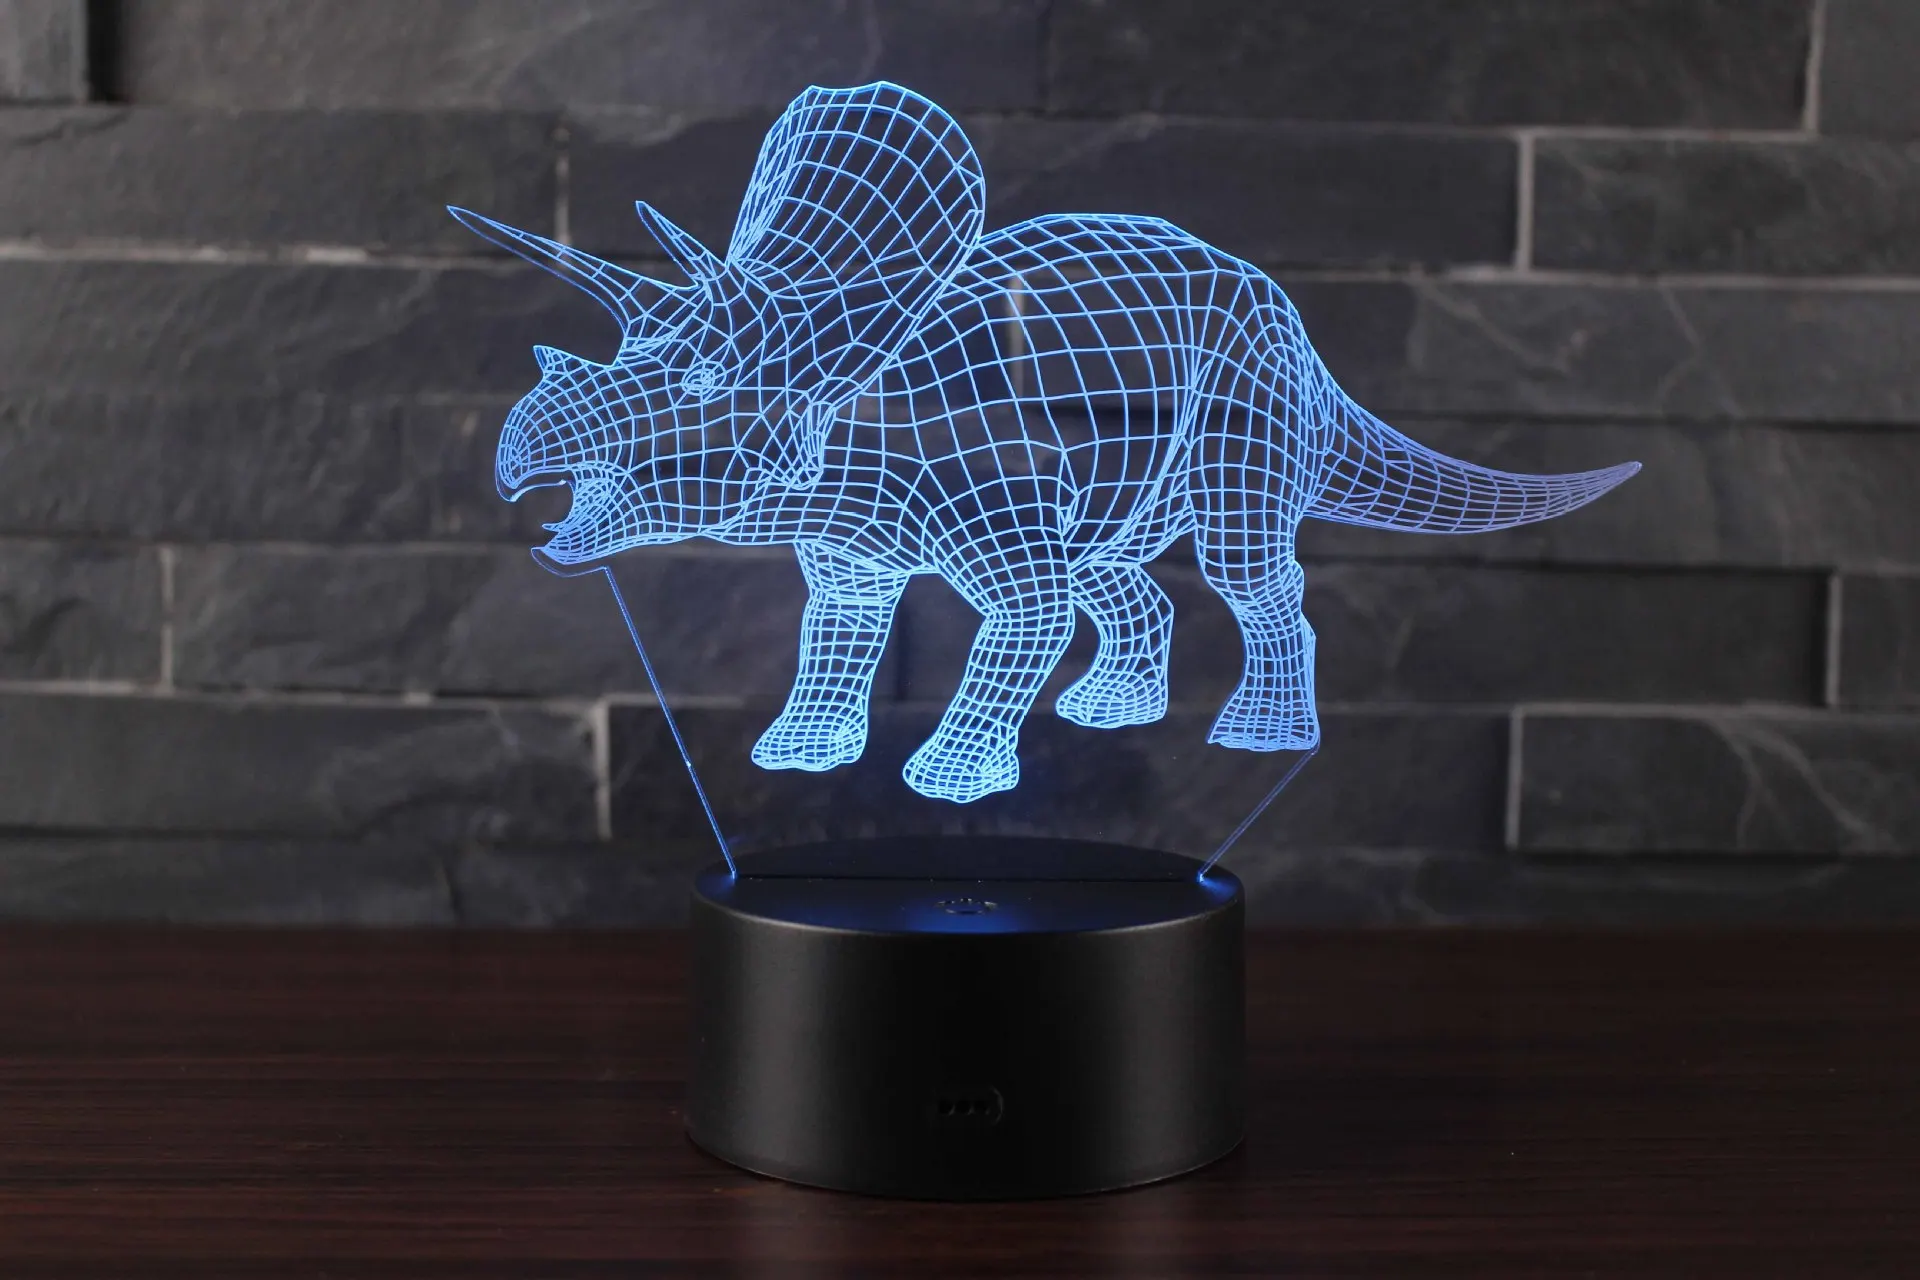 night stand lamps Cartoon Dinosaur 3D night light led remote control 7/16color touch control desk lamp bedside lamp birthday gift decoration nursery night light